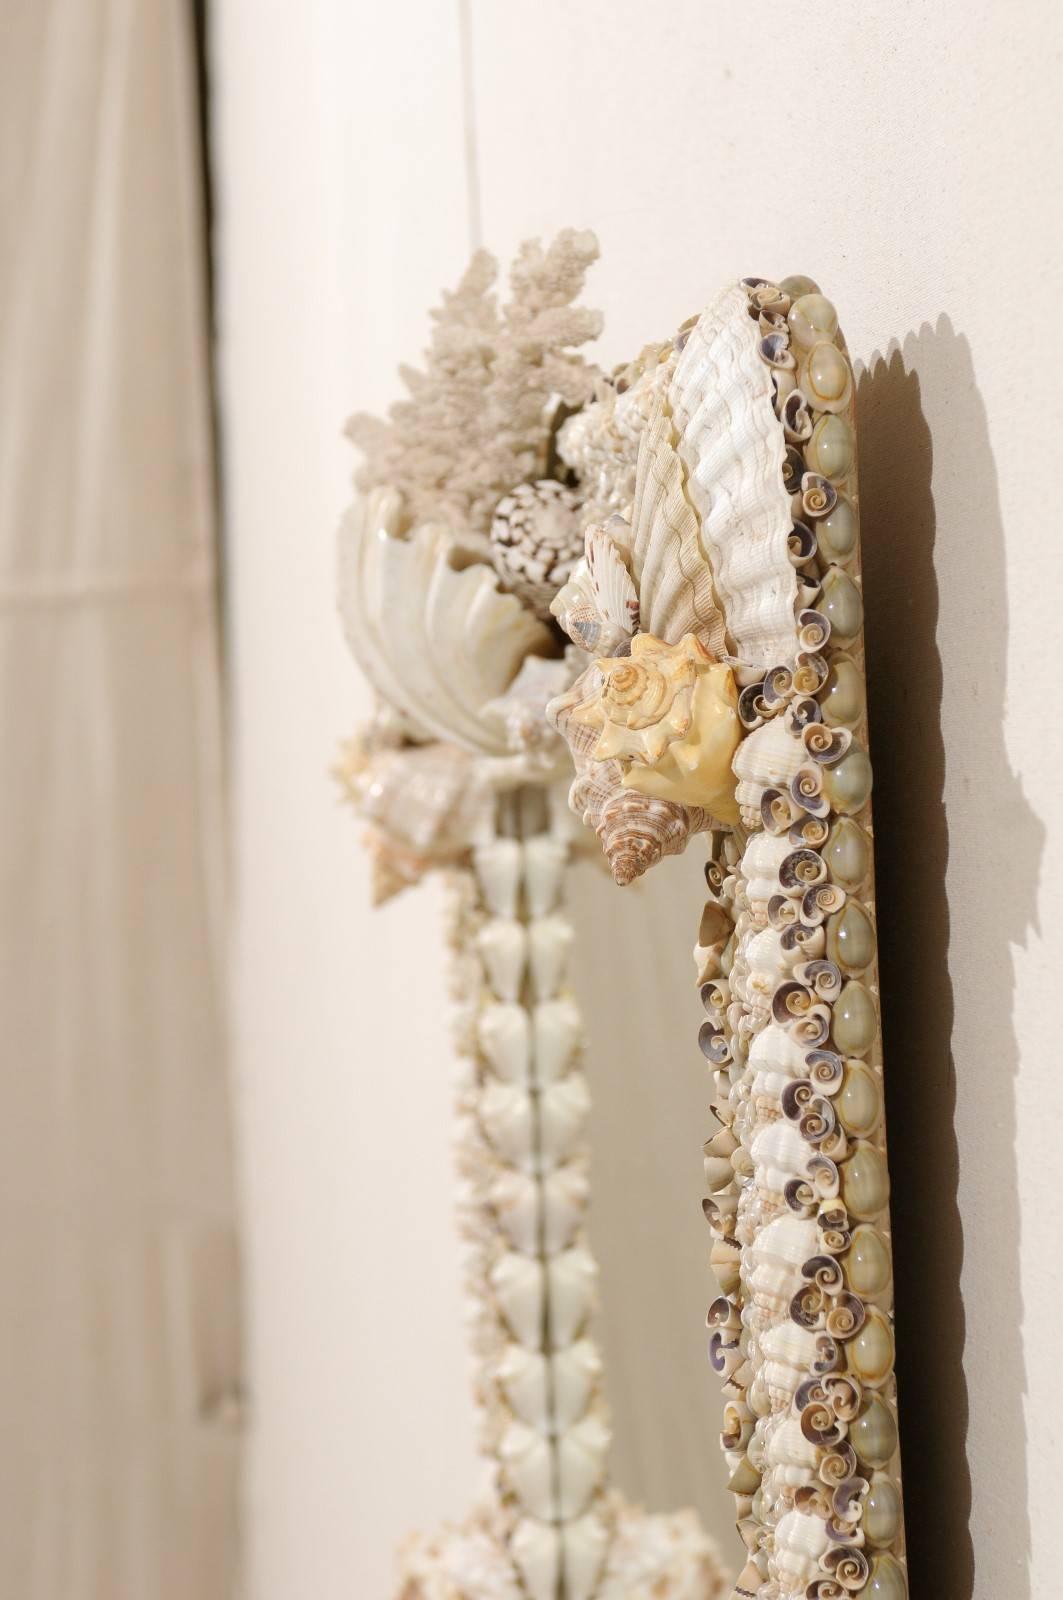 20th Century Real Seashell and Coral Oceanic Wall Mirror with Shells from the Indian Ocean